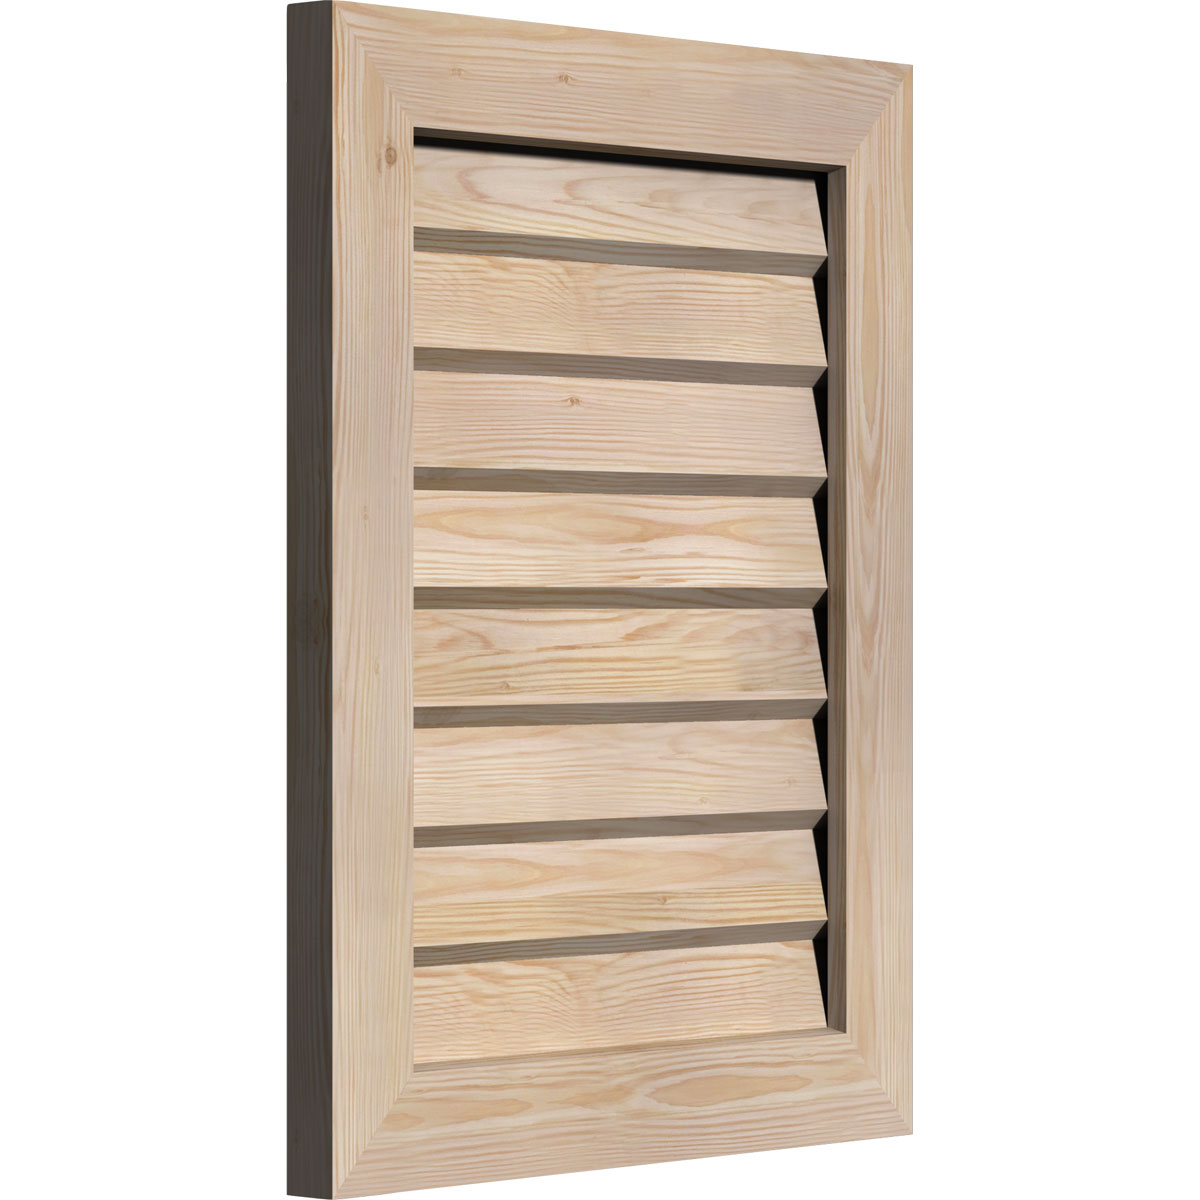 16"W x 30"H Vertical Gable Vent (21"W x 35"H Frame Size): Unfinished, Non-Functional, Smooth Pine Gable Vent w/ Decorative Face Frame - image 5 of 12